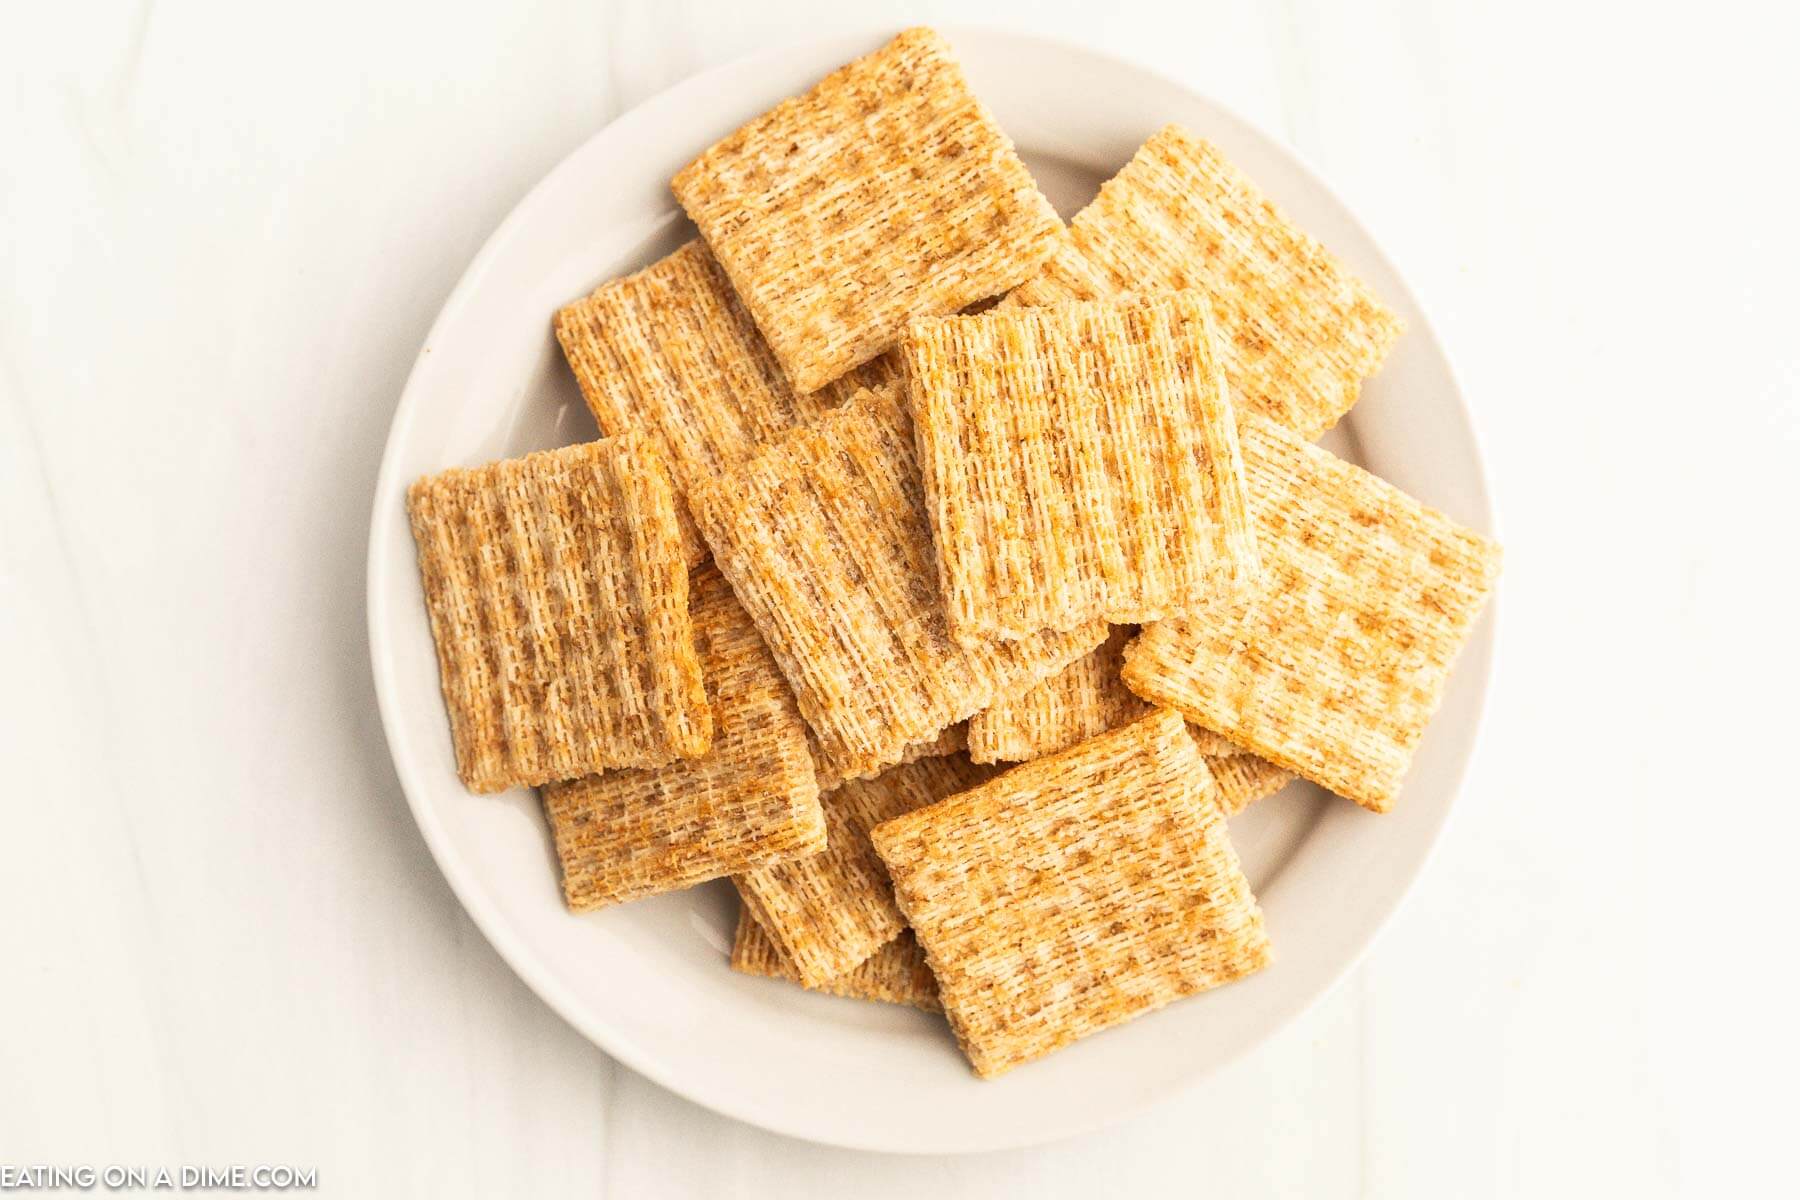 Whole wheat crackers on a plate